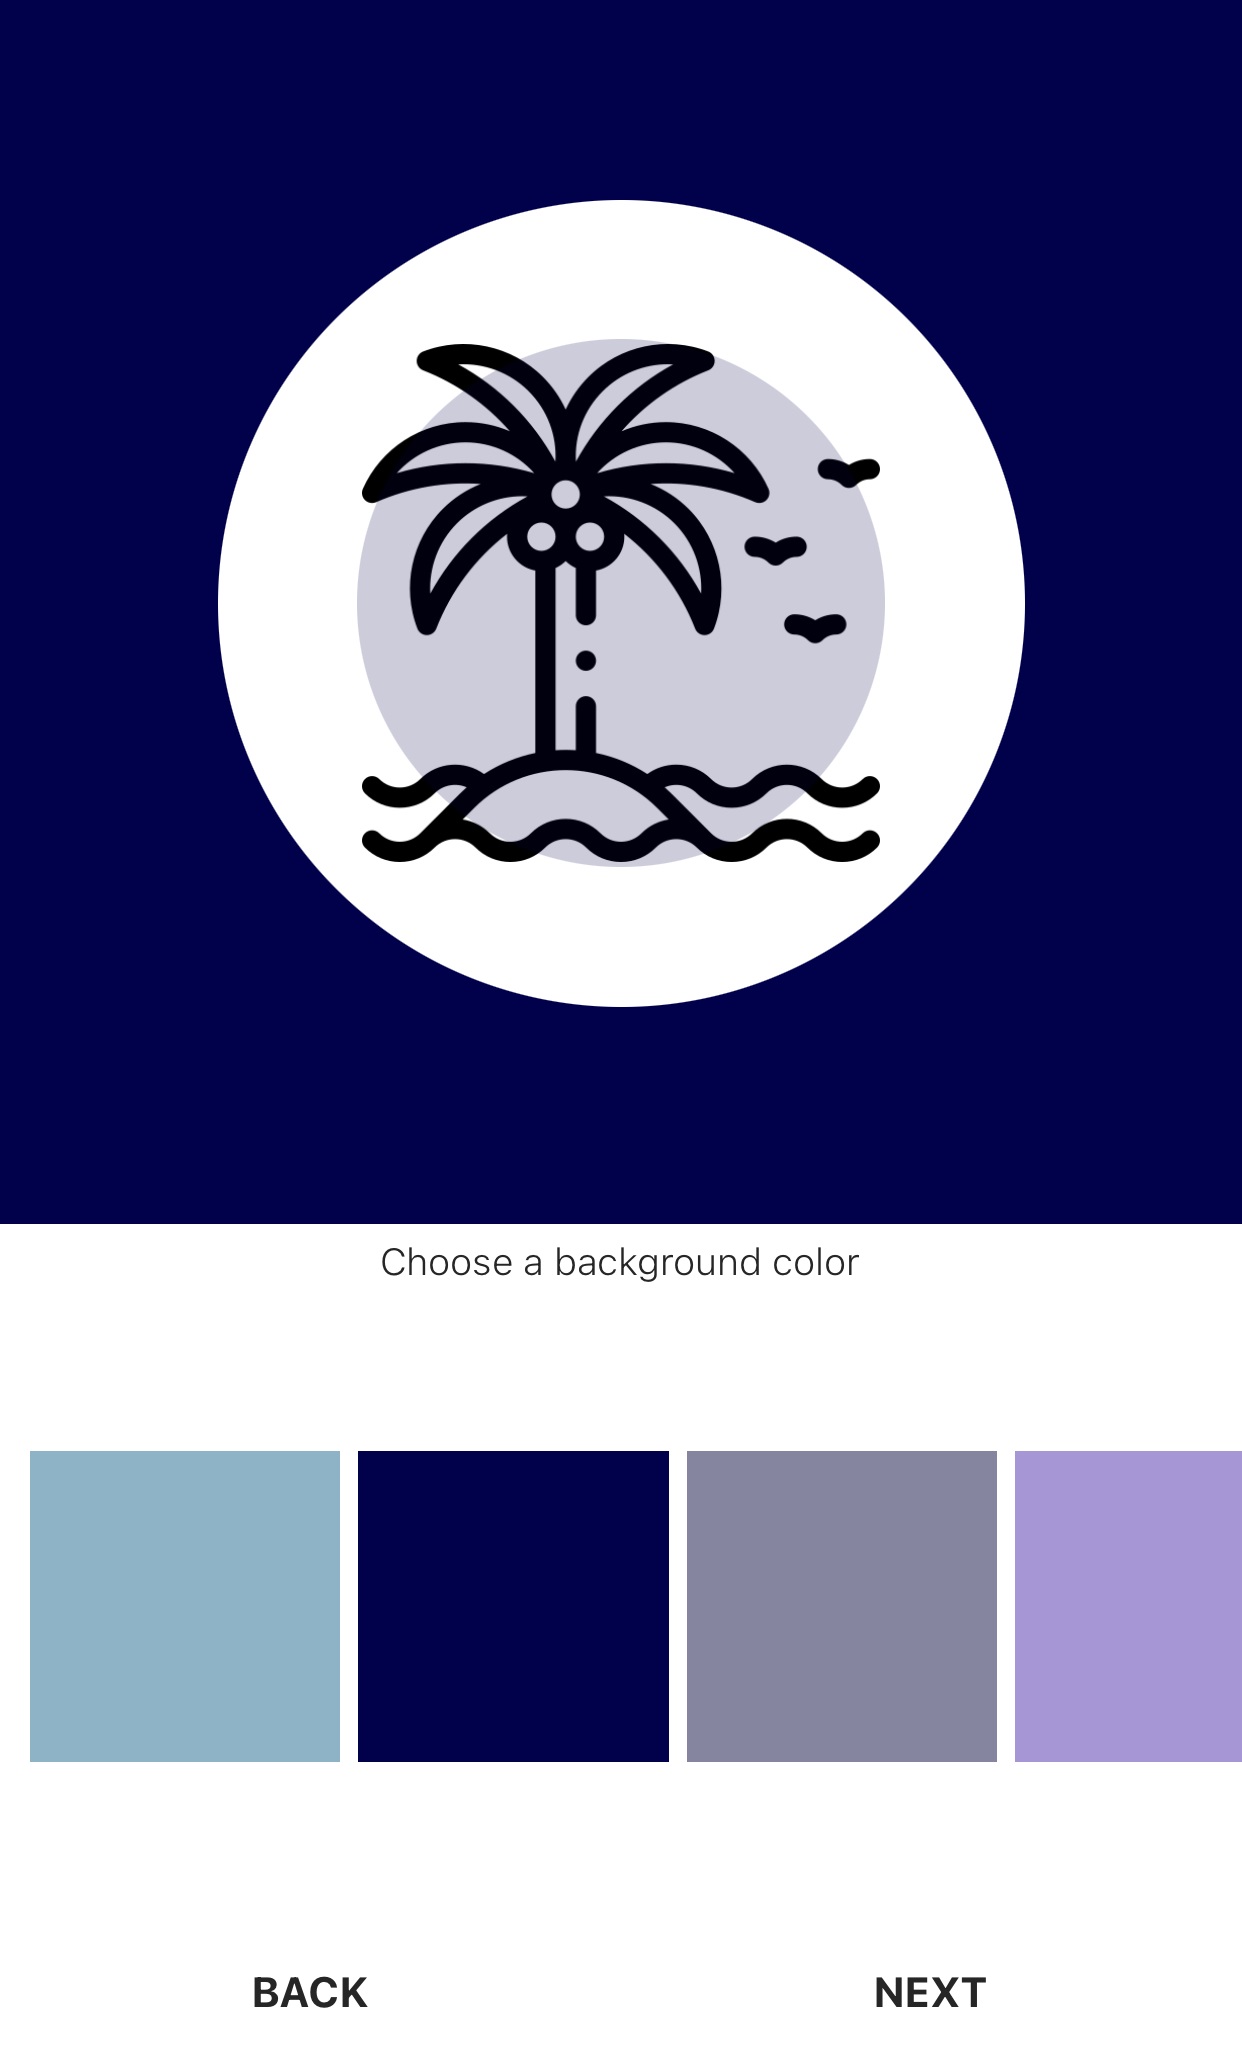 Make color adjustments according to your taste and proposed theme